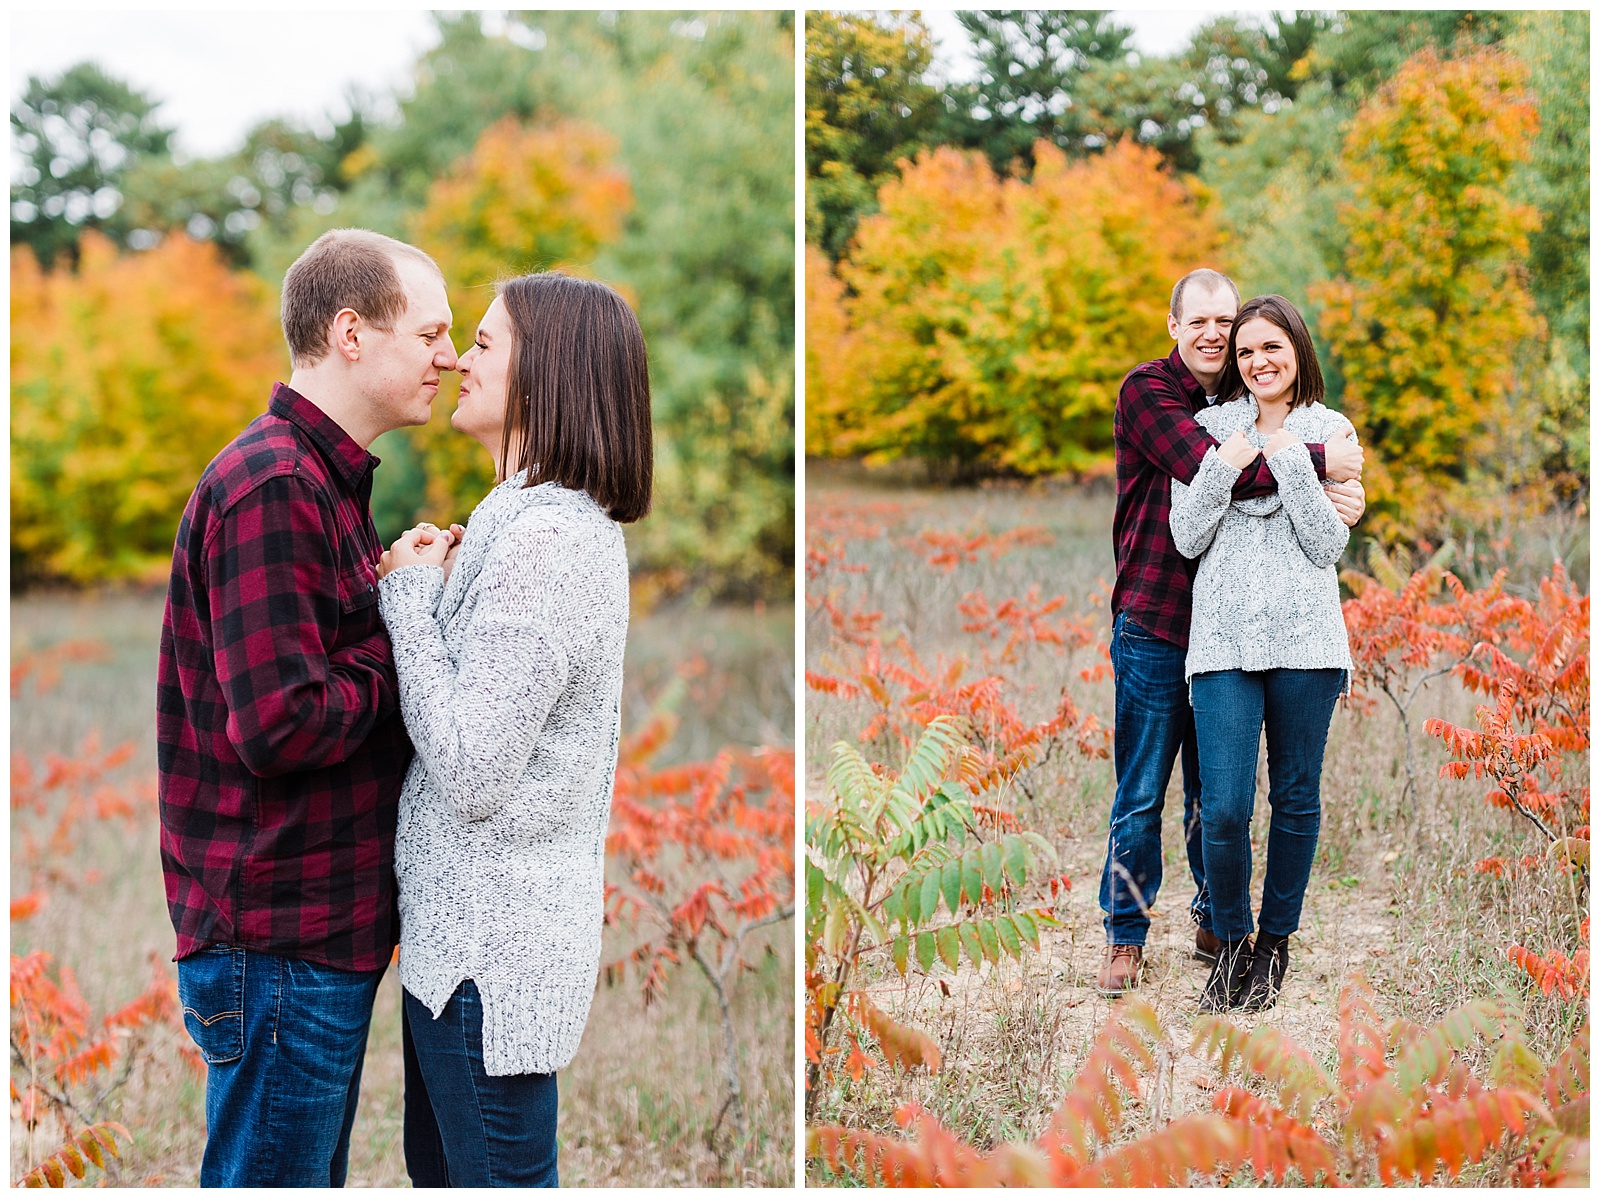 Couple embracing during Traverse City engagement photography session at Pelizzari Natural Area in Traverse City, Michigan.